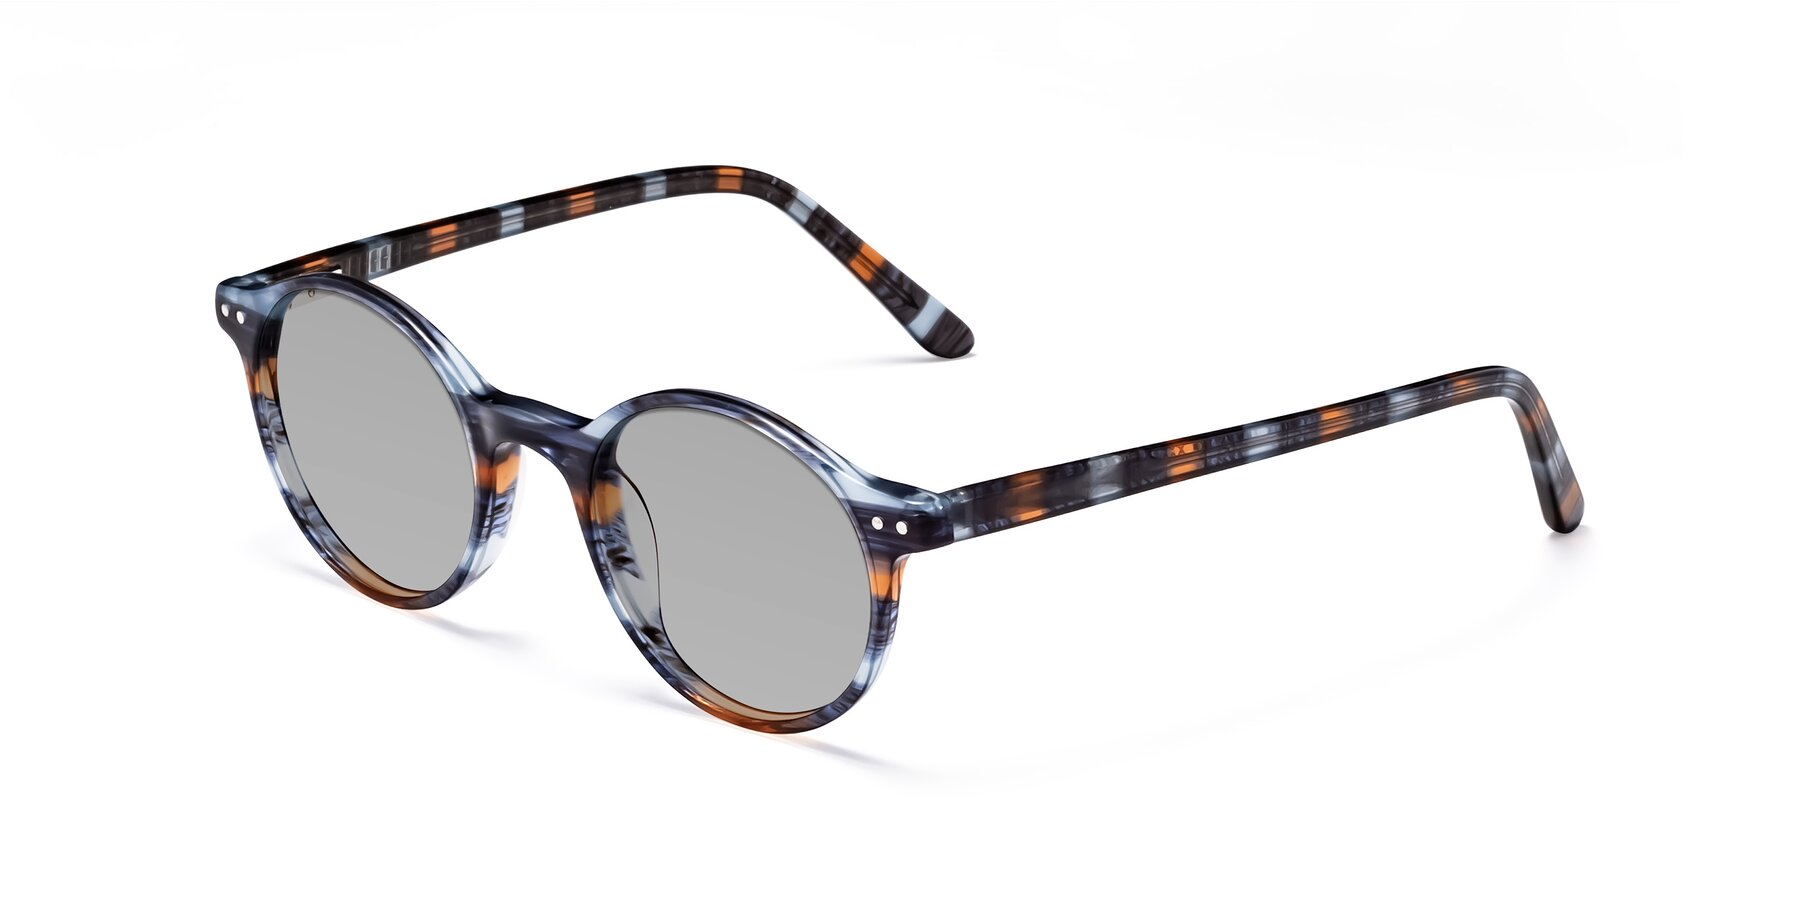 Angle of Jardi in Stripe Blue Brown with Light Gray Tinted Lenses